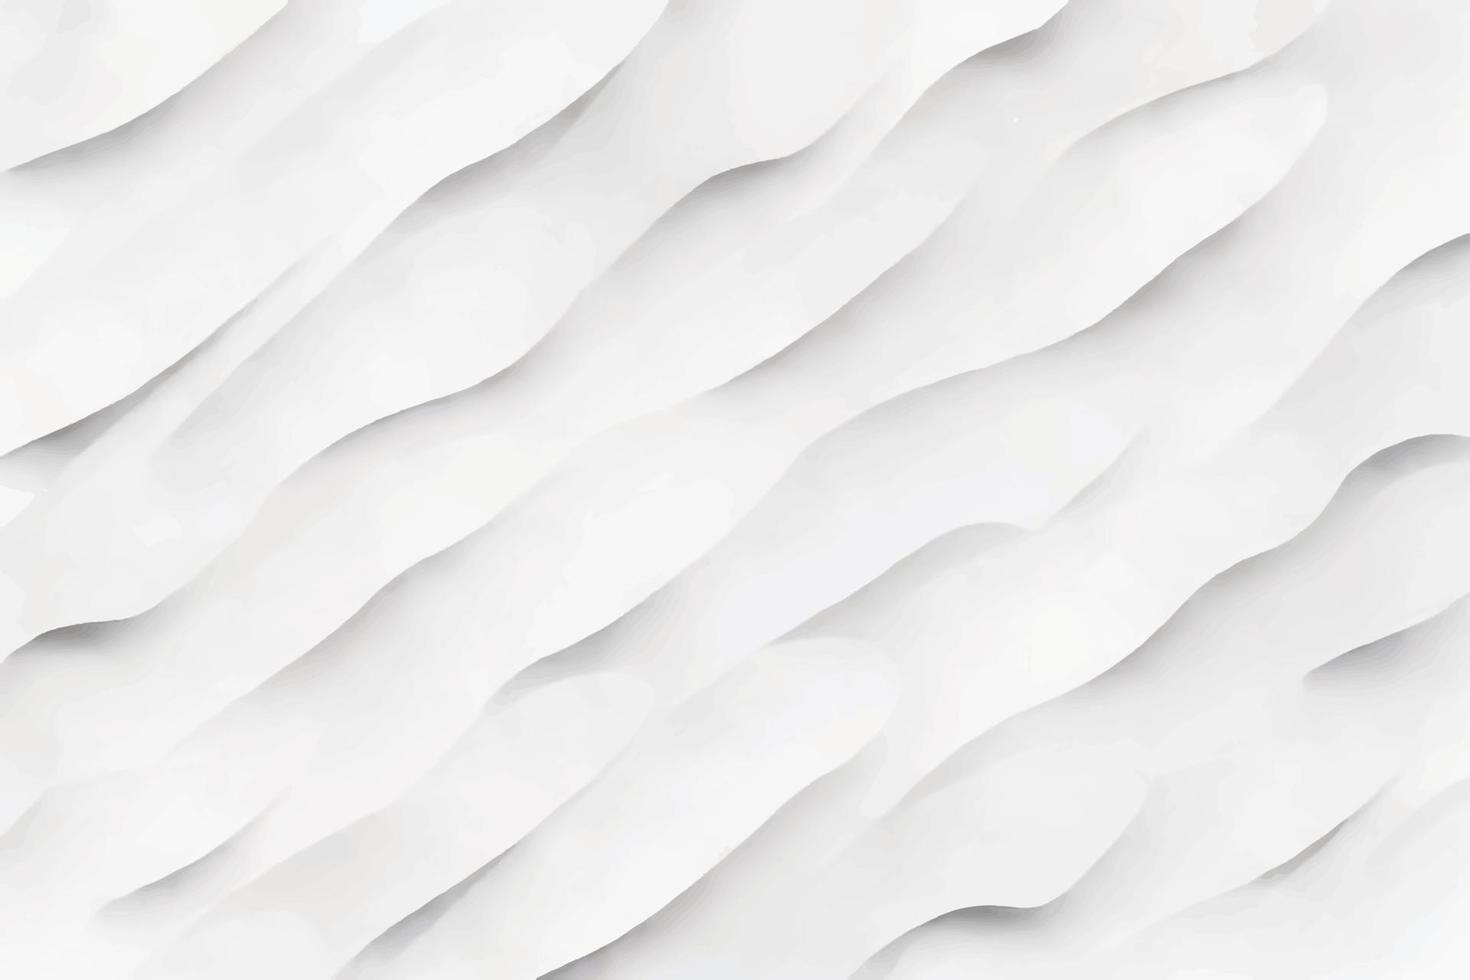 Minimalist White Wave Abstract Background vector